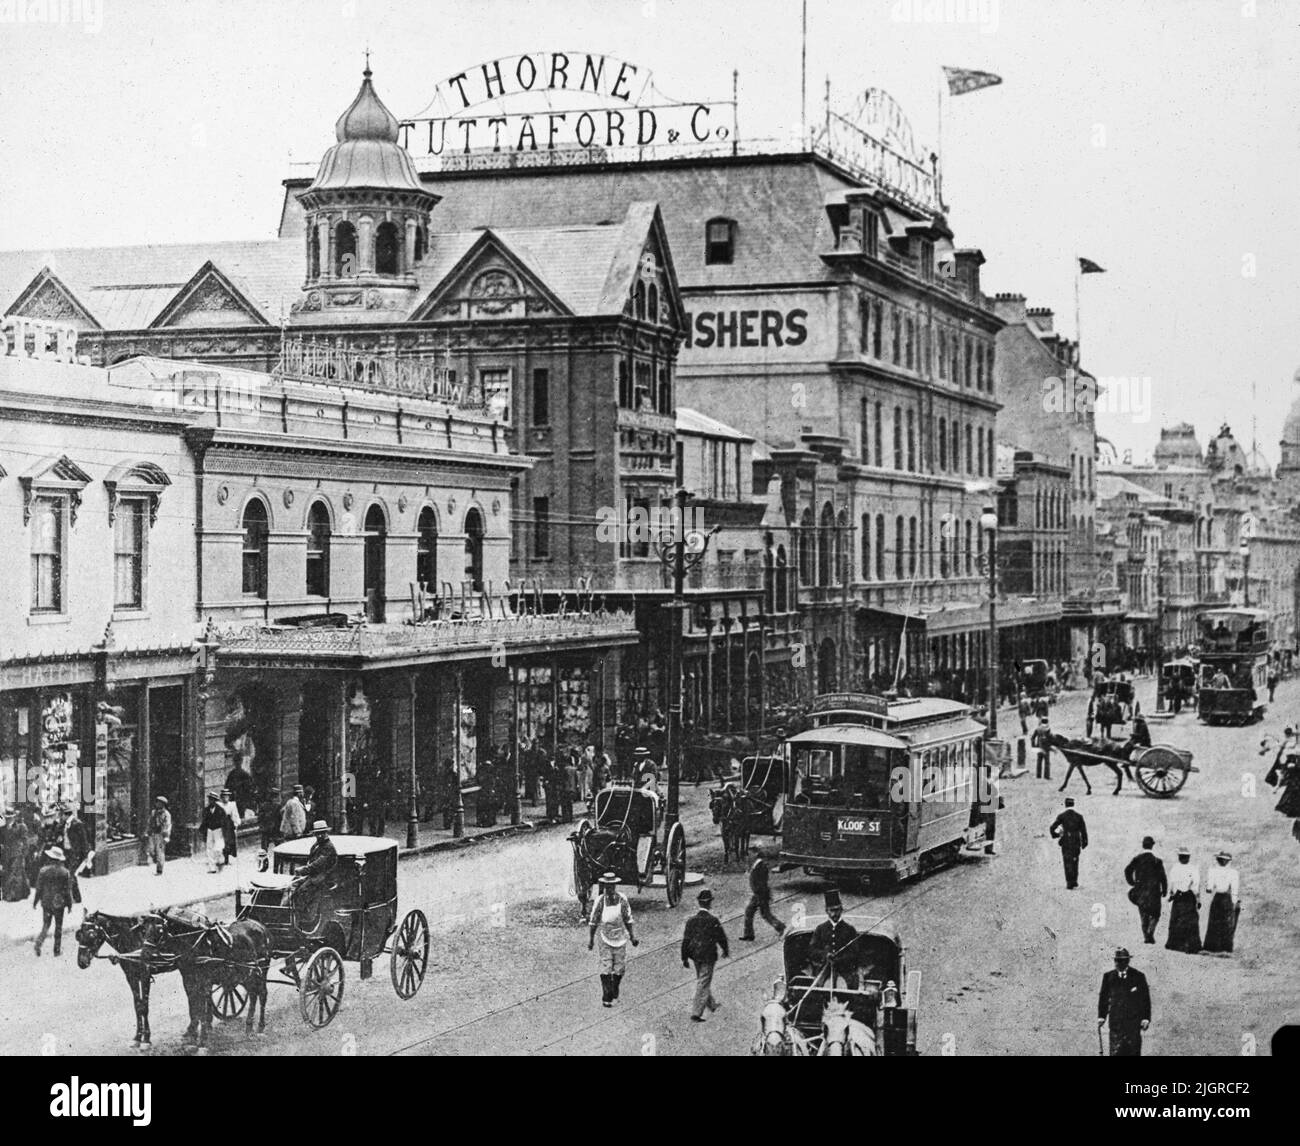 A vintage black and white photograph showing Adderley Street in Cape Town in South Africa, around 1897. The store of Thorne and Stuttaford & Co. in the centre. Stock Photo